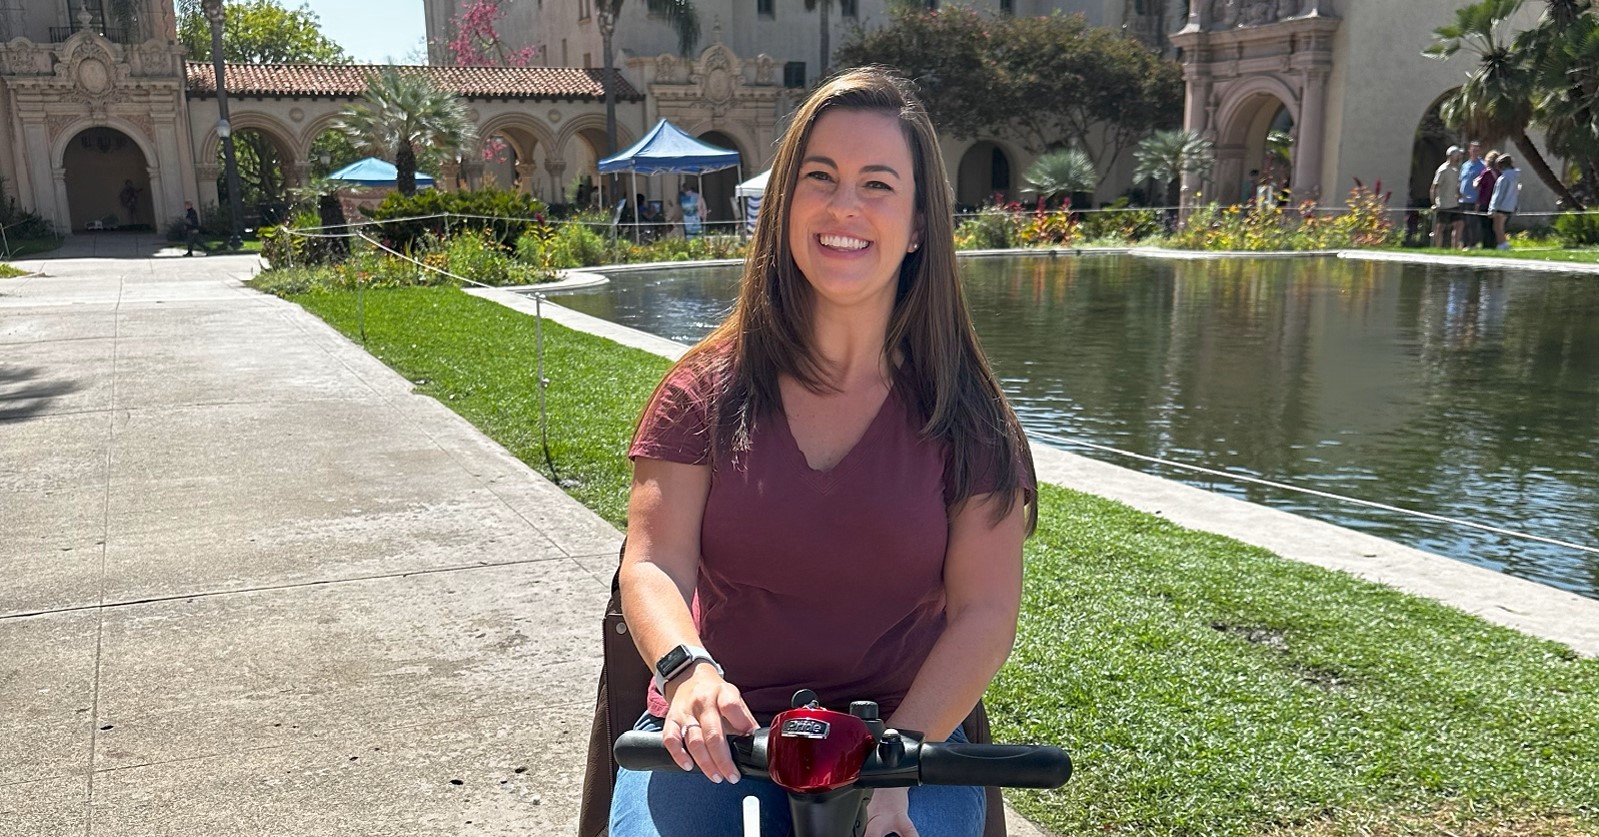 Writer Chelsea Bear sits on a mobility scooter near the Lily Pond in Balboa Park, during a tour of the park as part of her visit to San Diego.